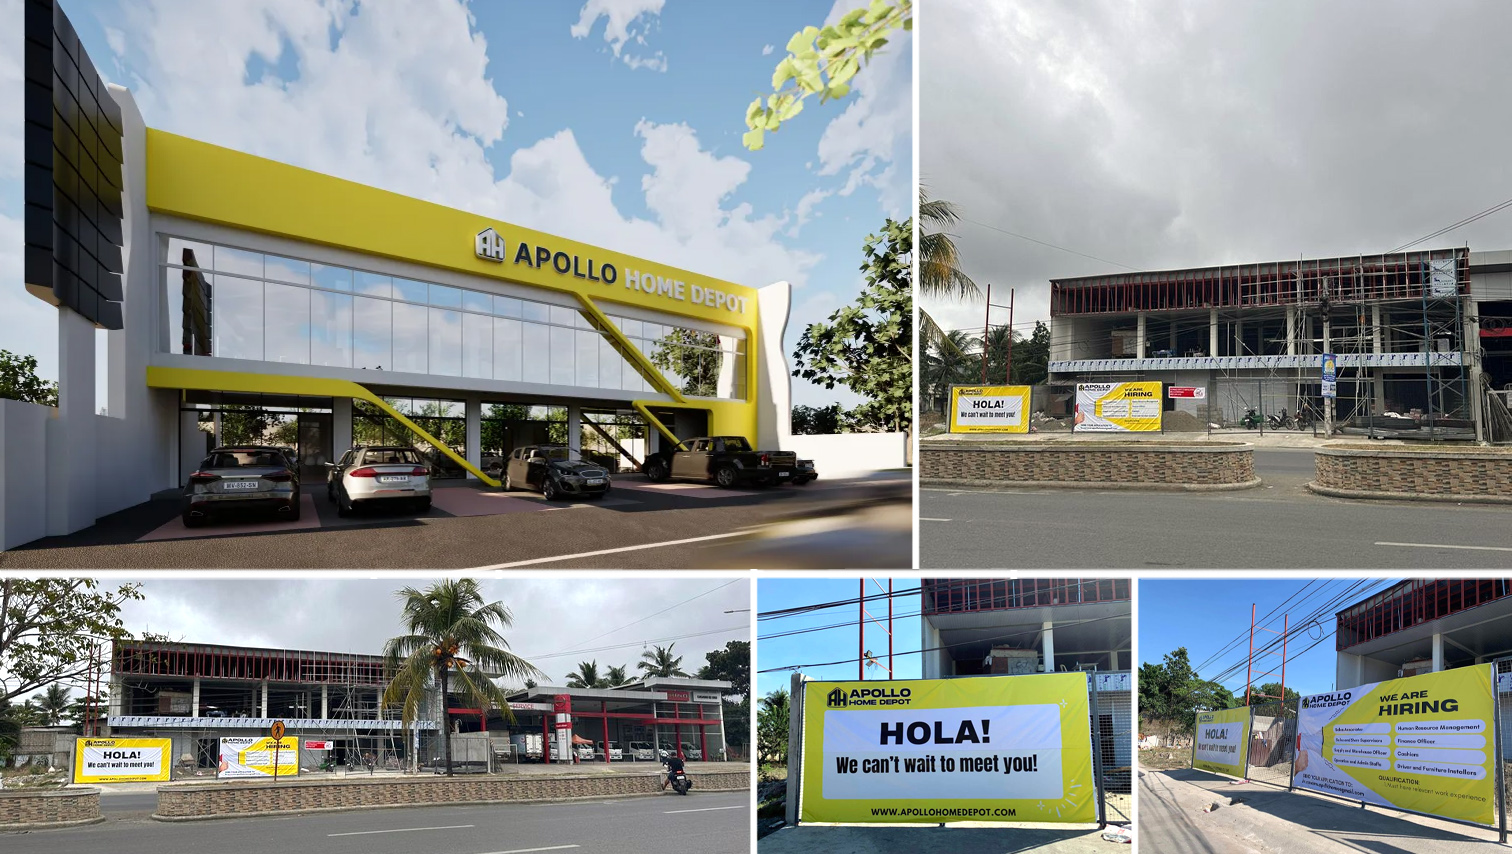 PROJECT WATCH: Apollo Home Depot to open in Kauswagan